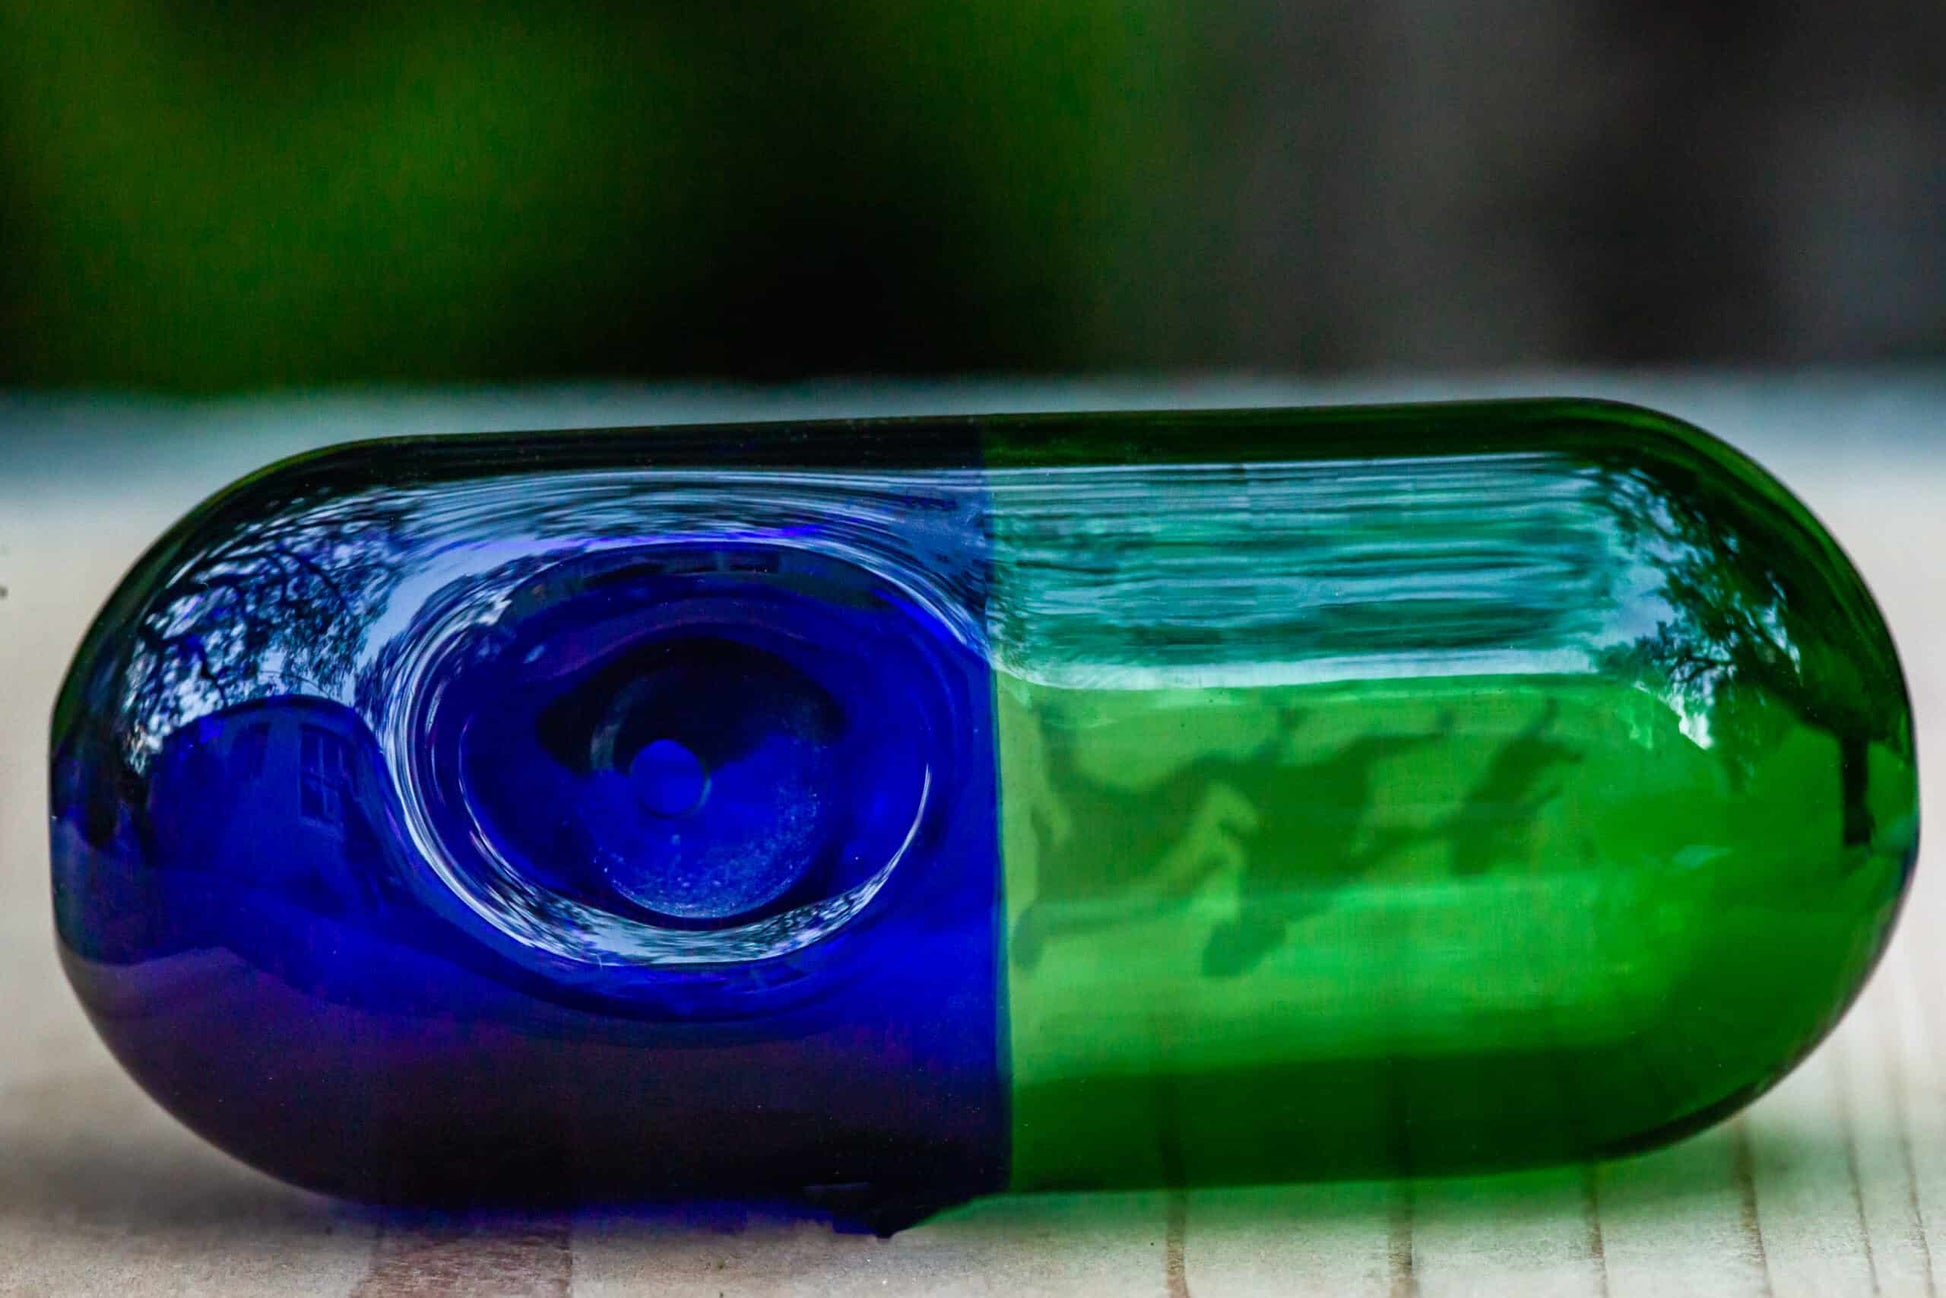 exquisite design of the Green & Blue Pill Hand Pipe by JAG